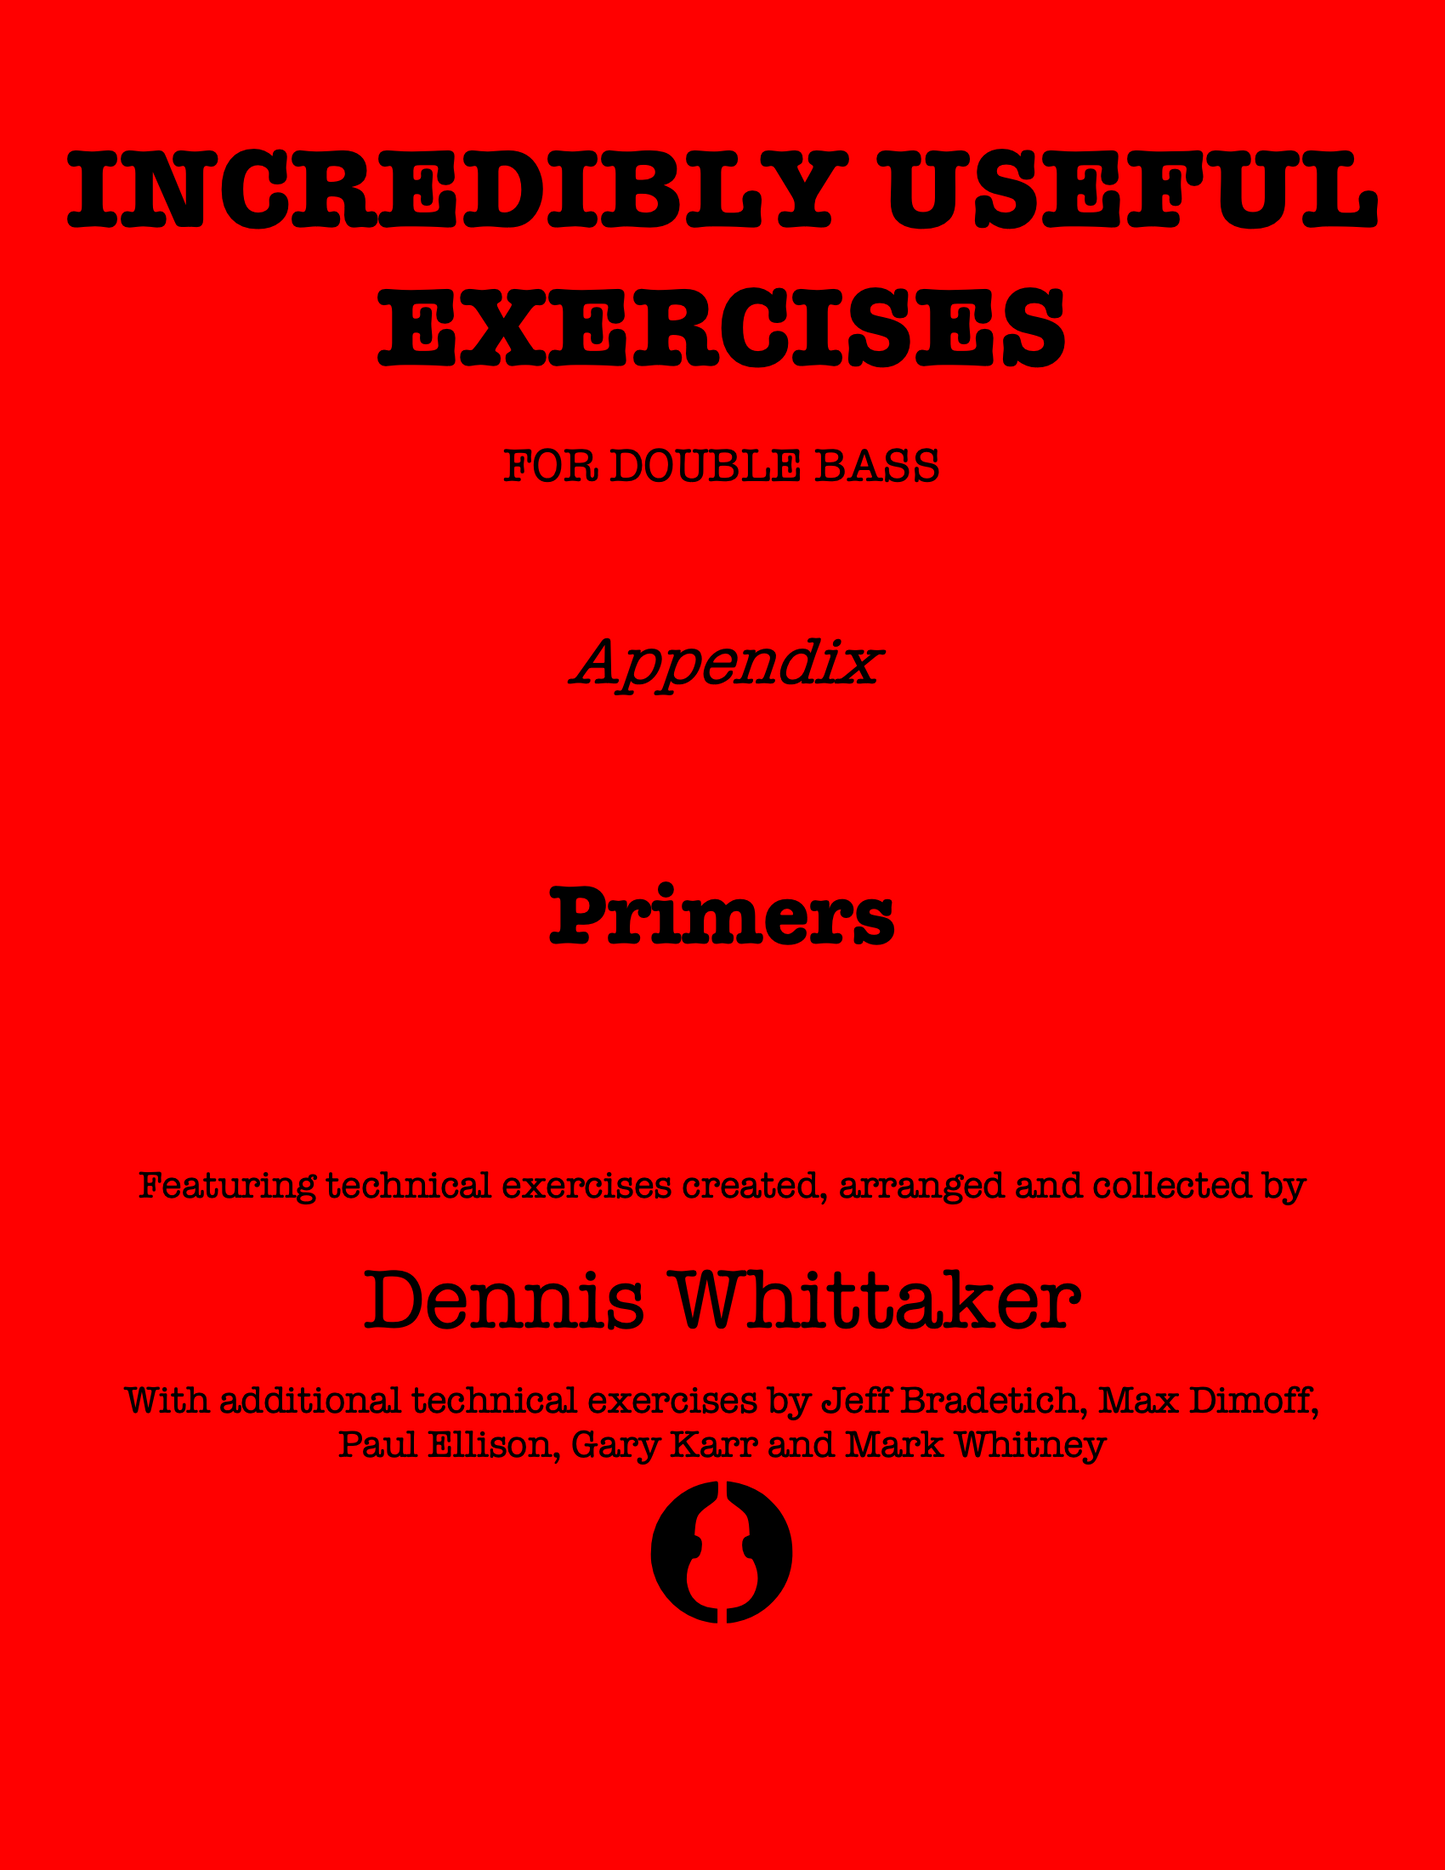 Incredibly Useful Exercises for Double Bass, Vol. 18, Primers